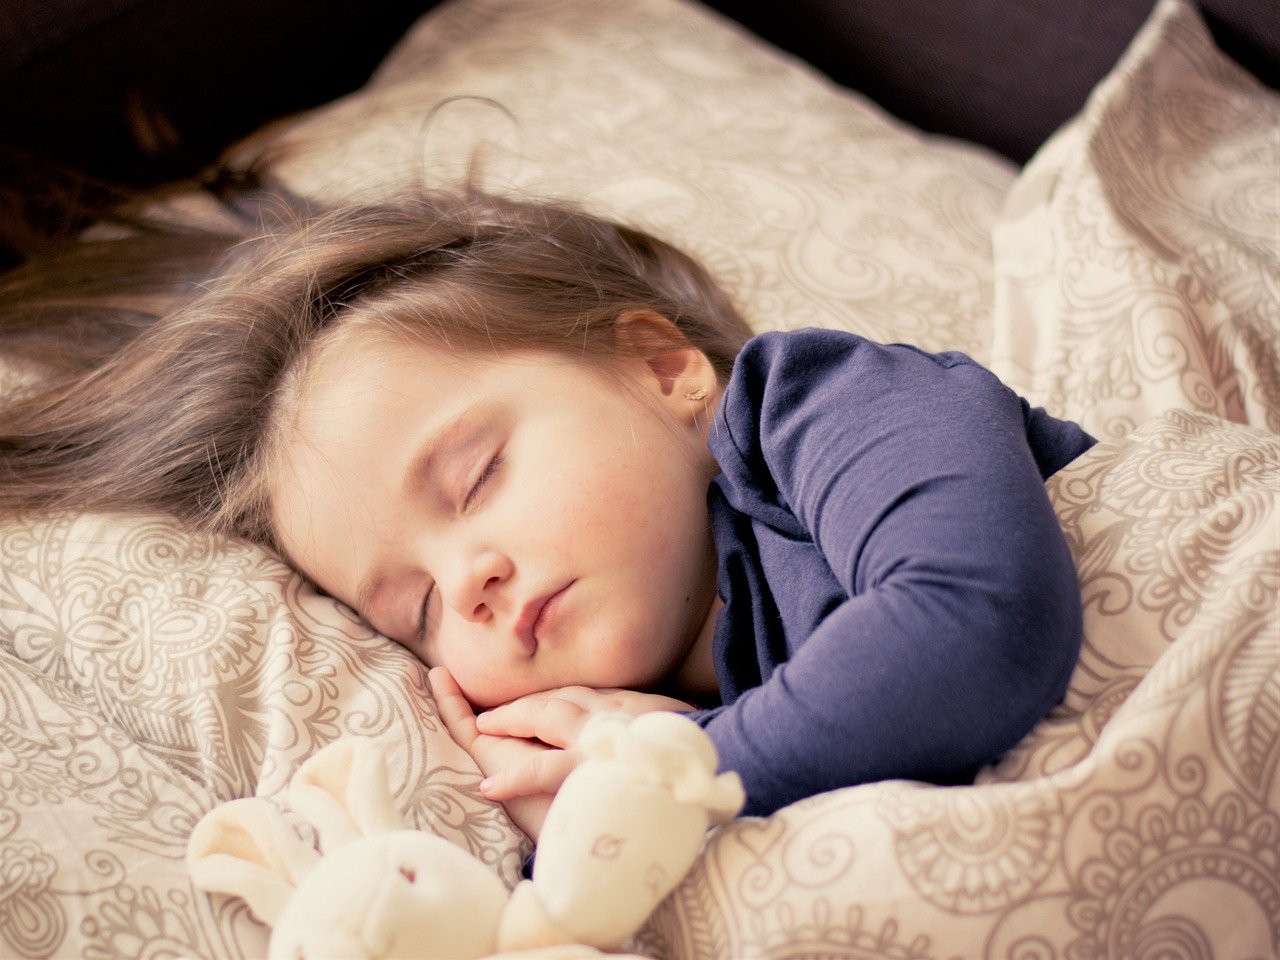 Here’s How You Can Help Your Kid Deal With DIPG Sleep Issues